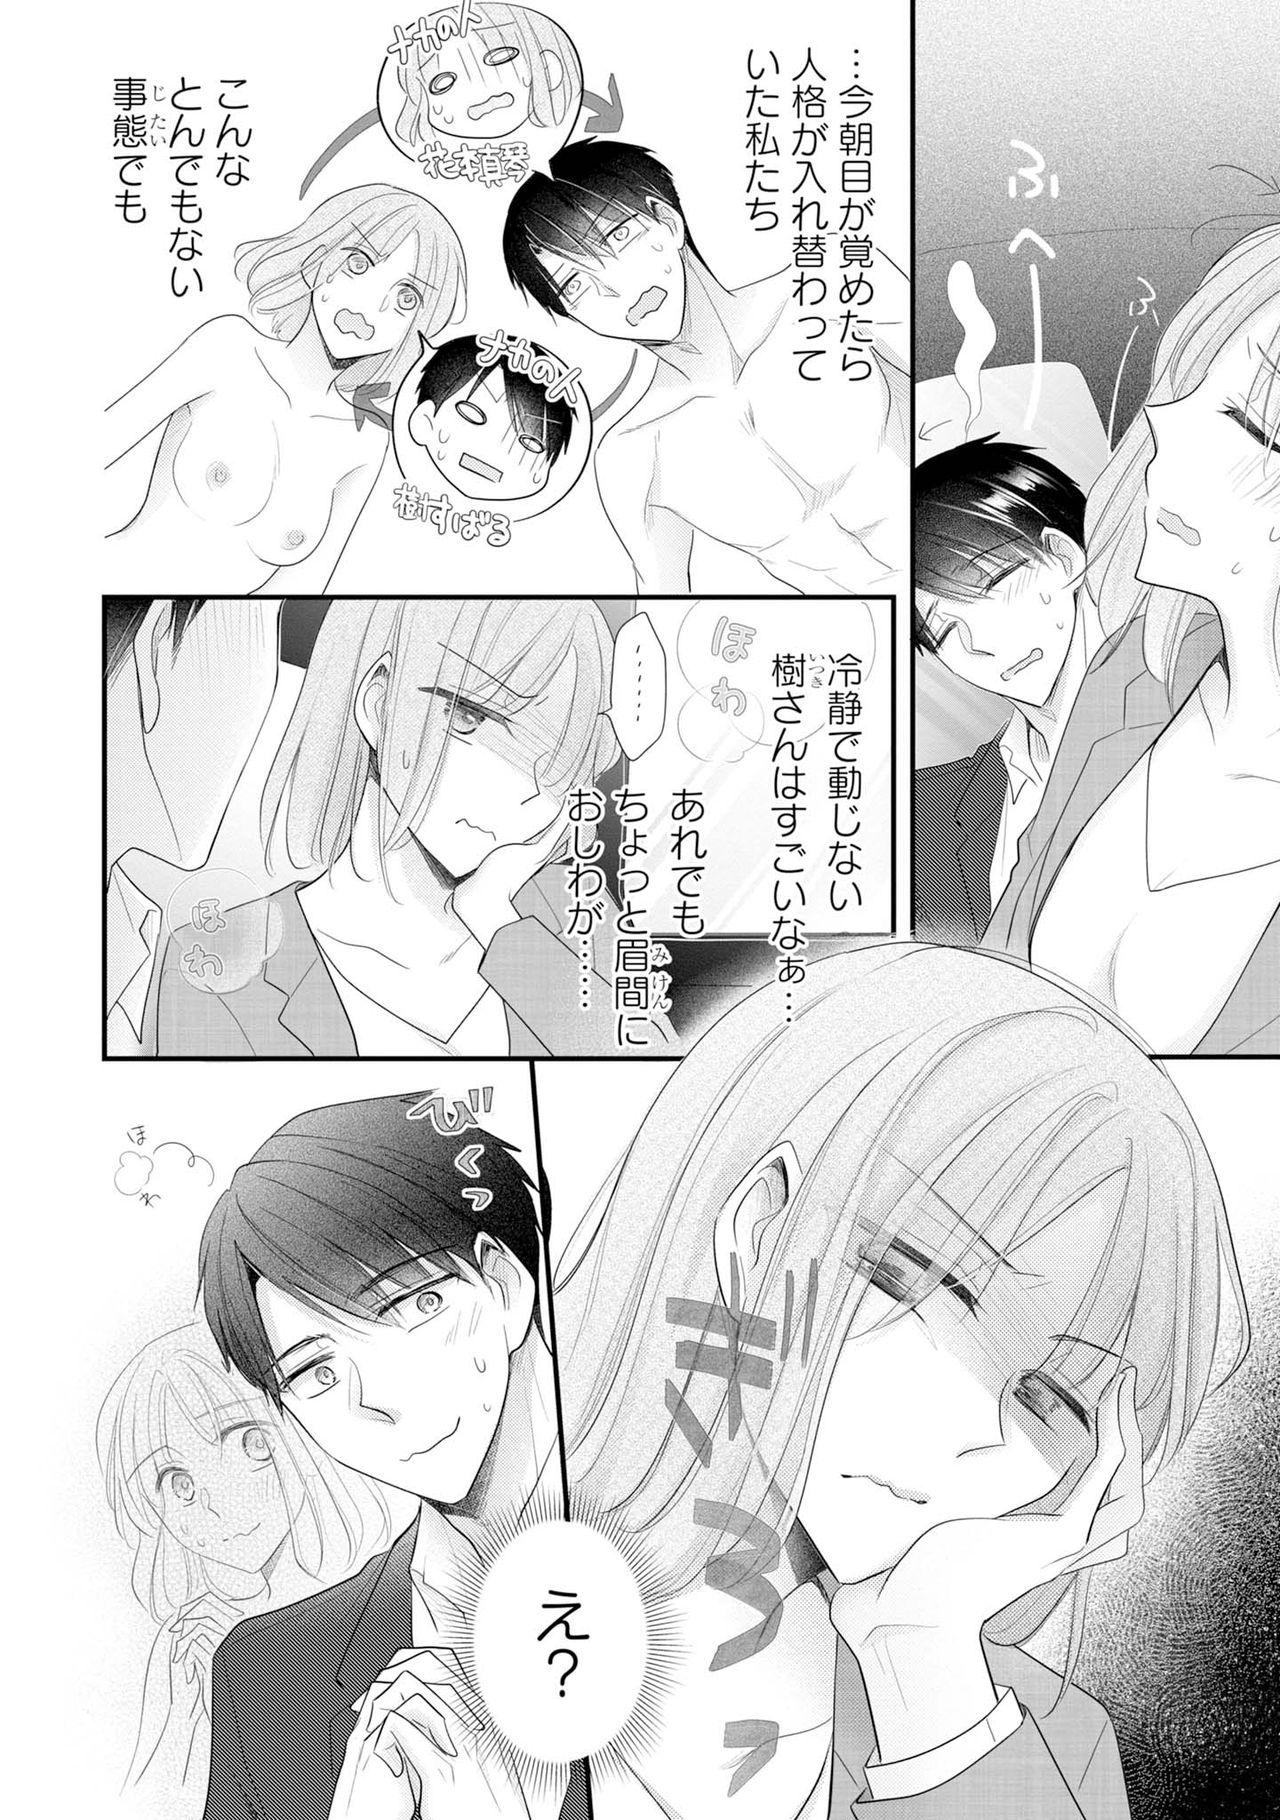 Lezdom 上司とエッチしたら挿れ替わっちゃった!?～彼が何度も入ってキちゃう…～ 第2-3話 Missionary Position Porn - Page 4